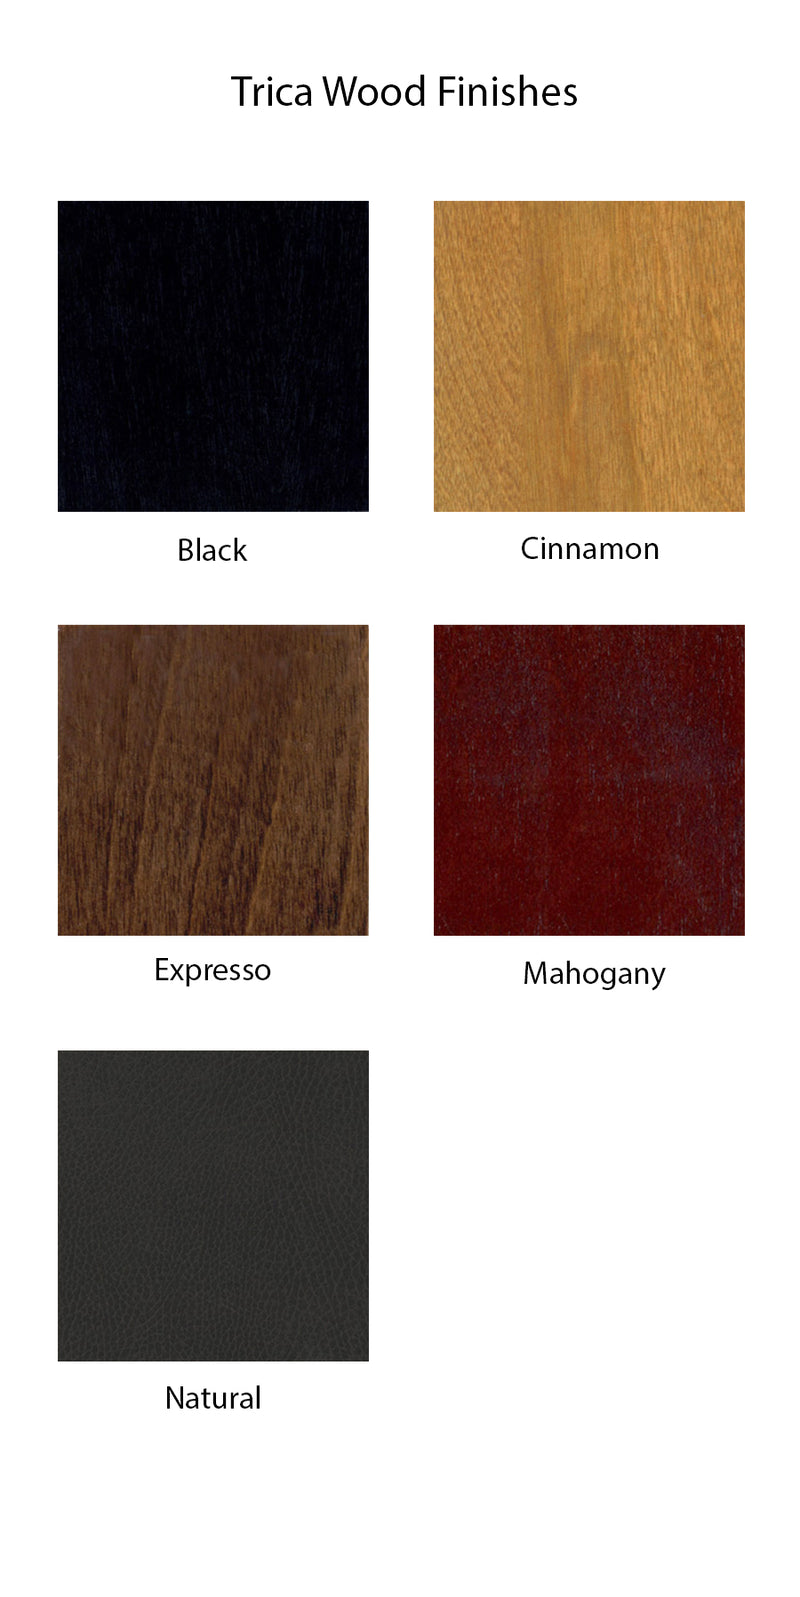 products/wood-finishes-trica_d0947132-e259-457b-8028-480556a9725c.jpg